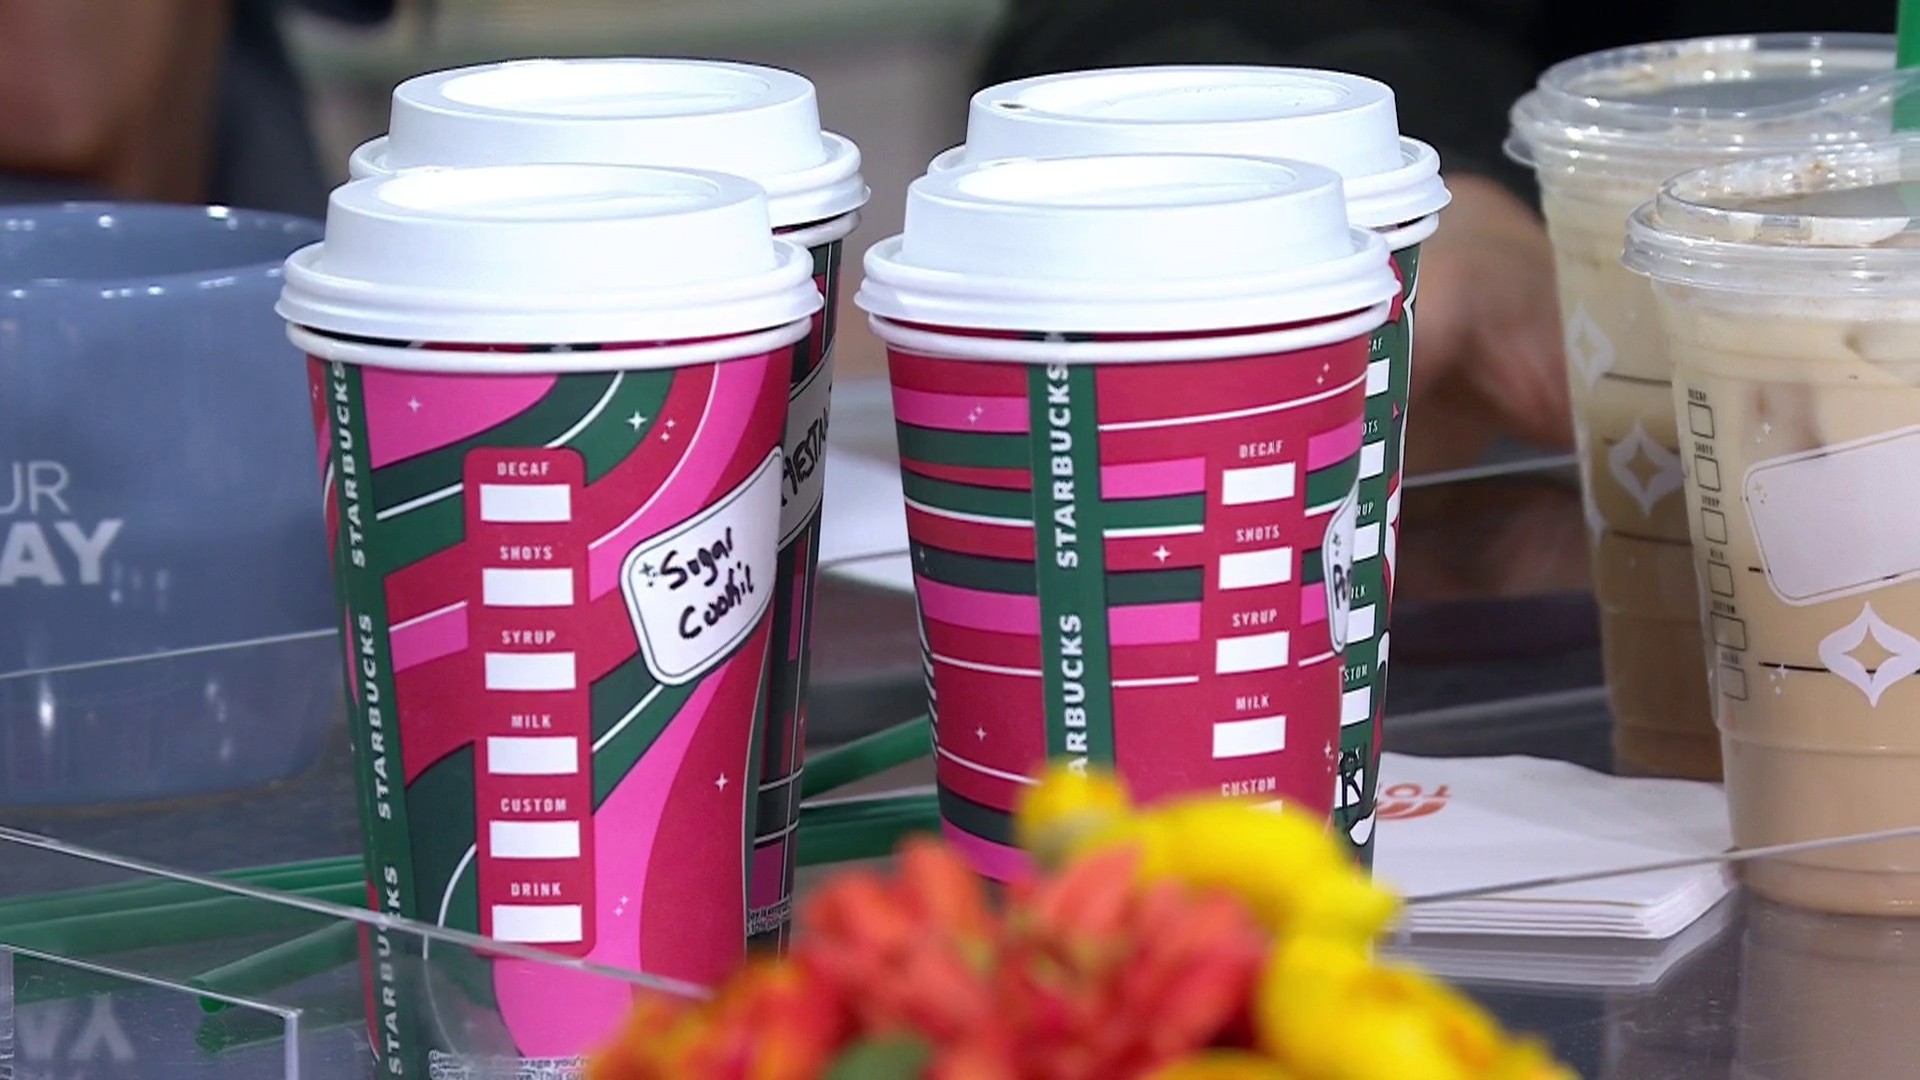 Starbucks unveils this year's most festive holiday gifts